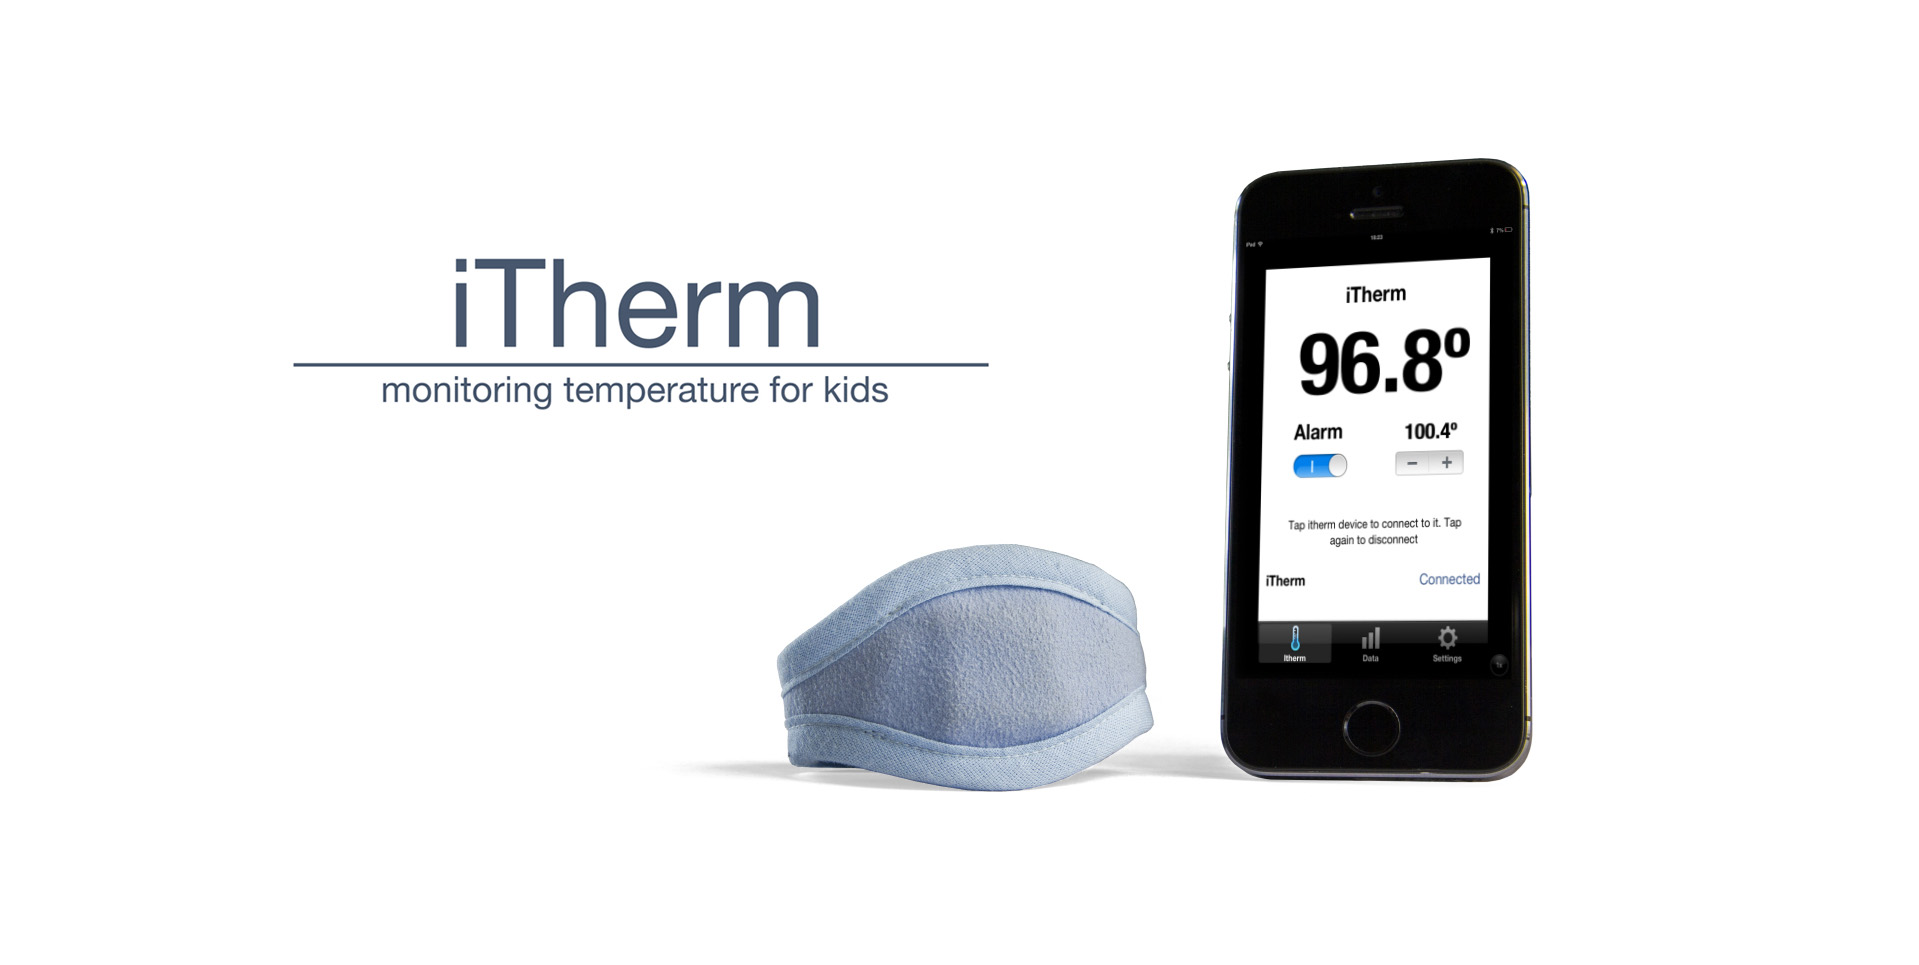 itherm